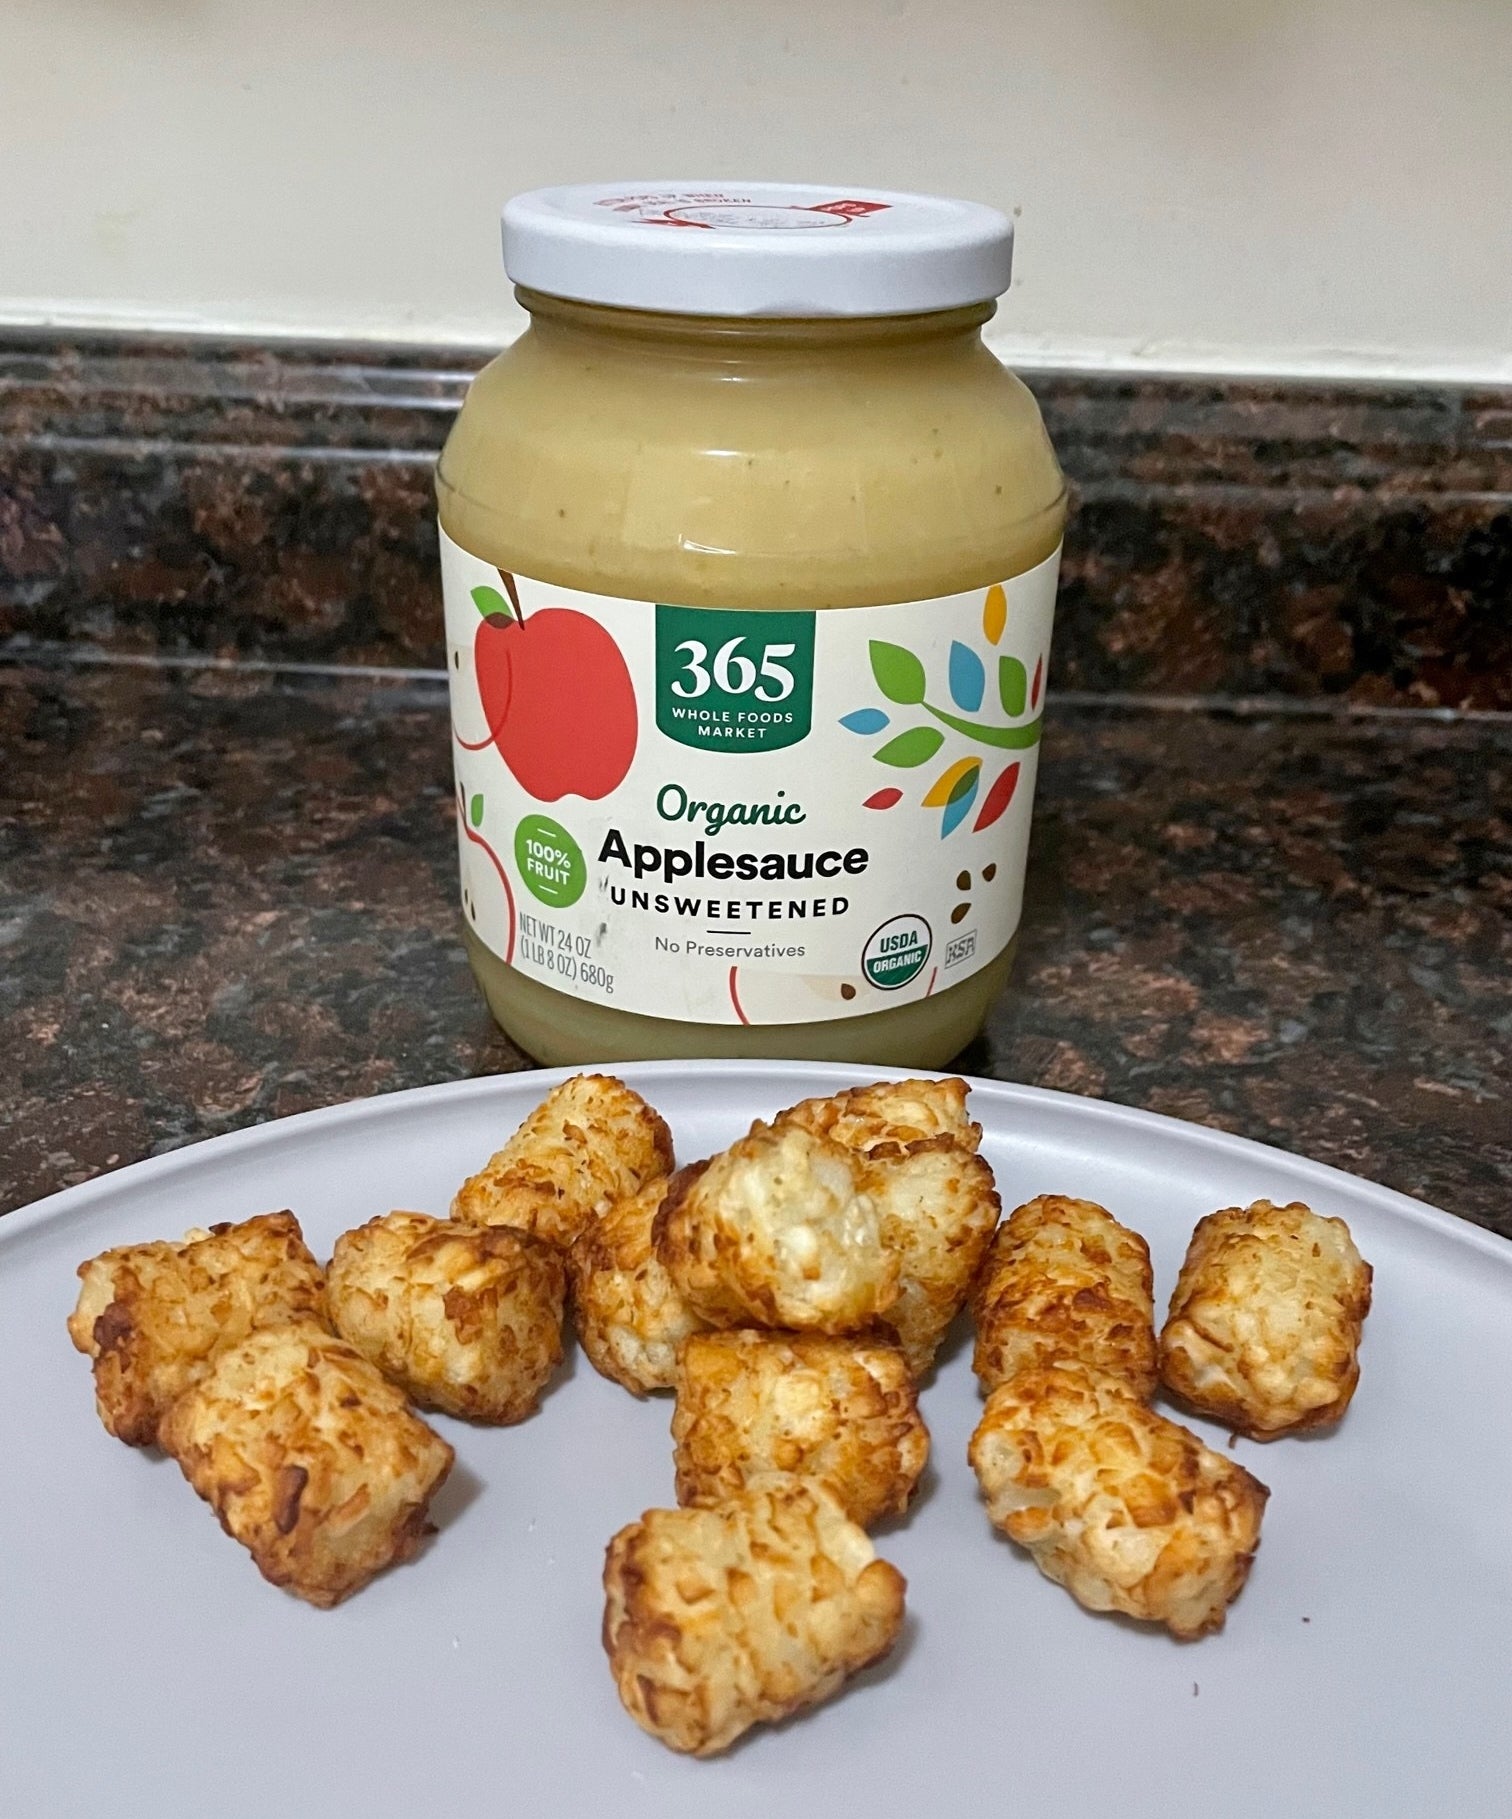 Tater tots and applesauce.